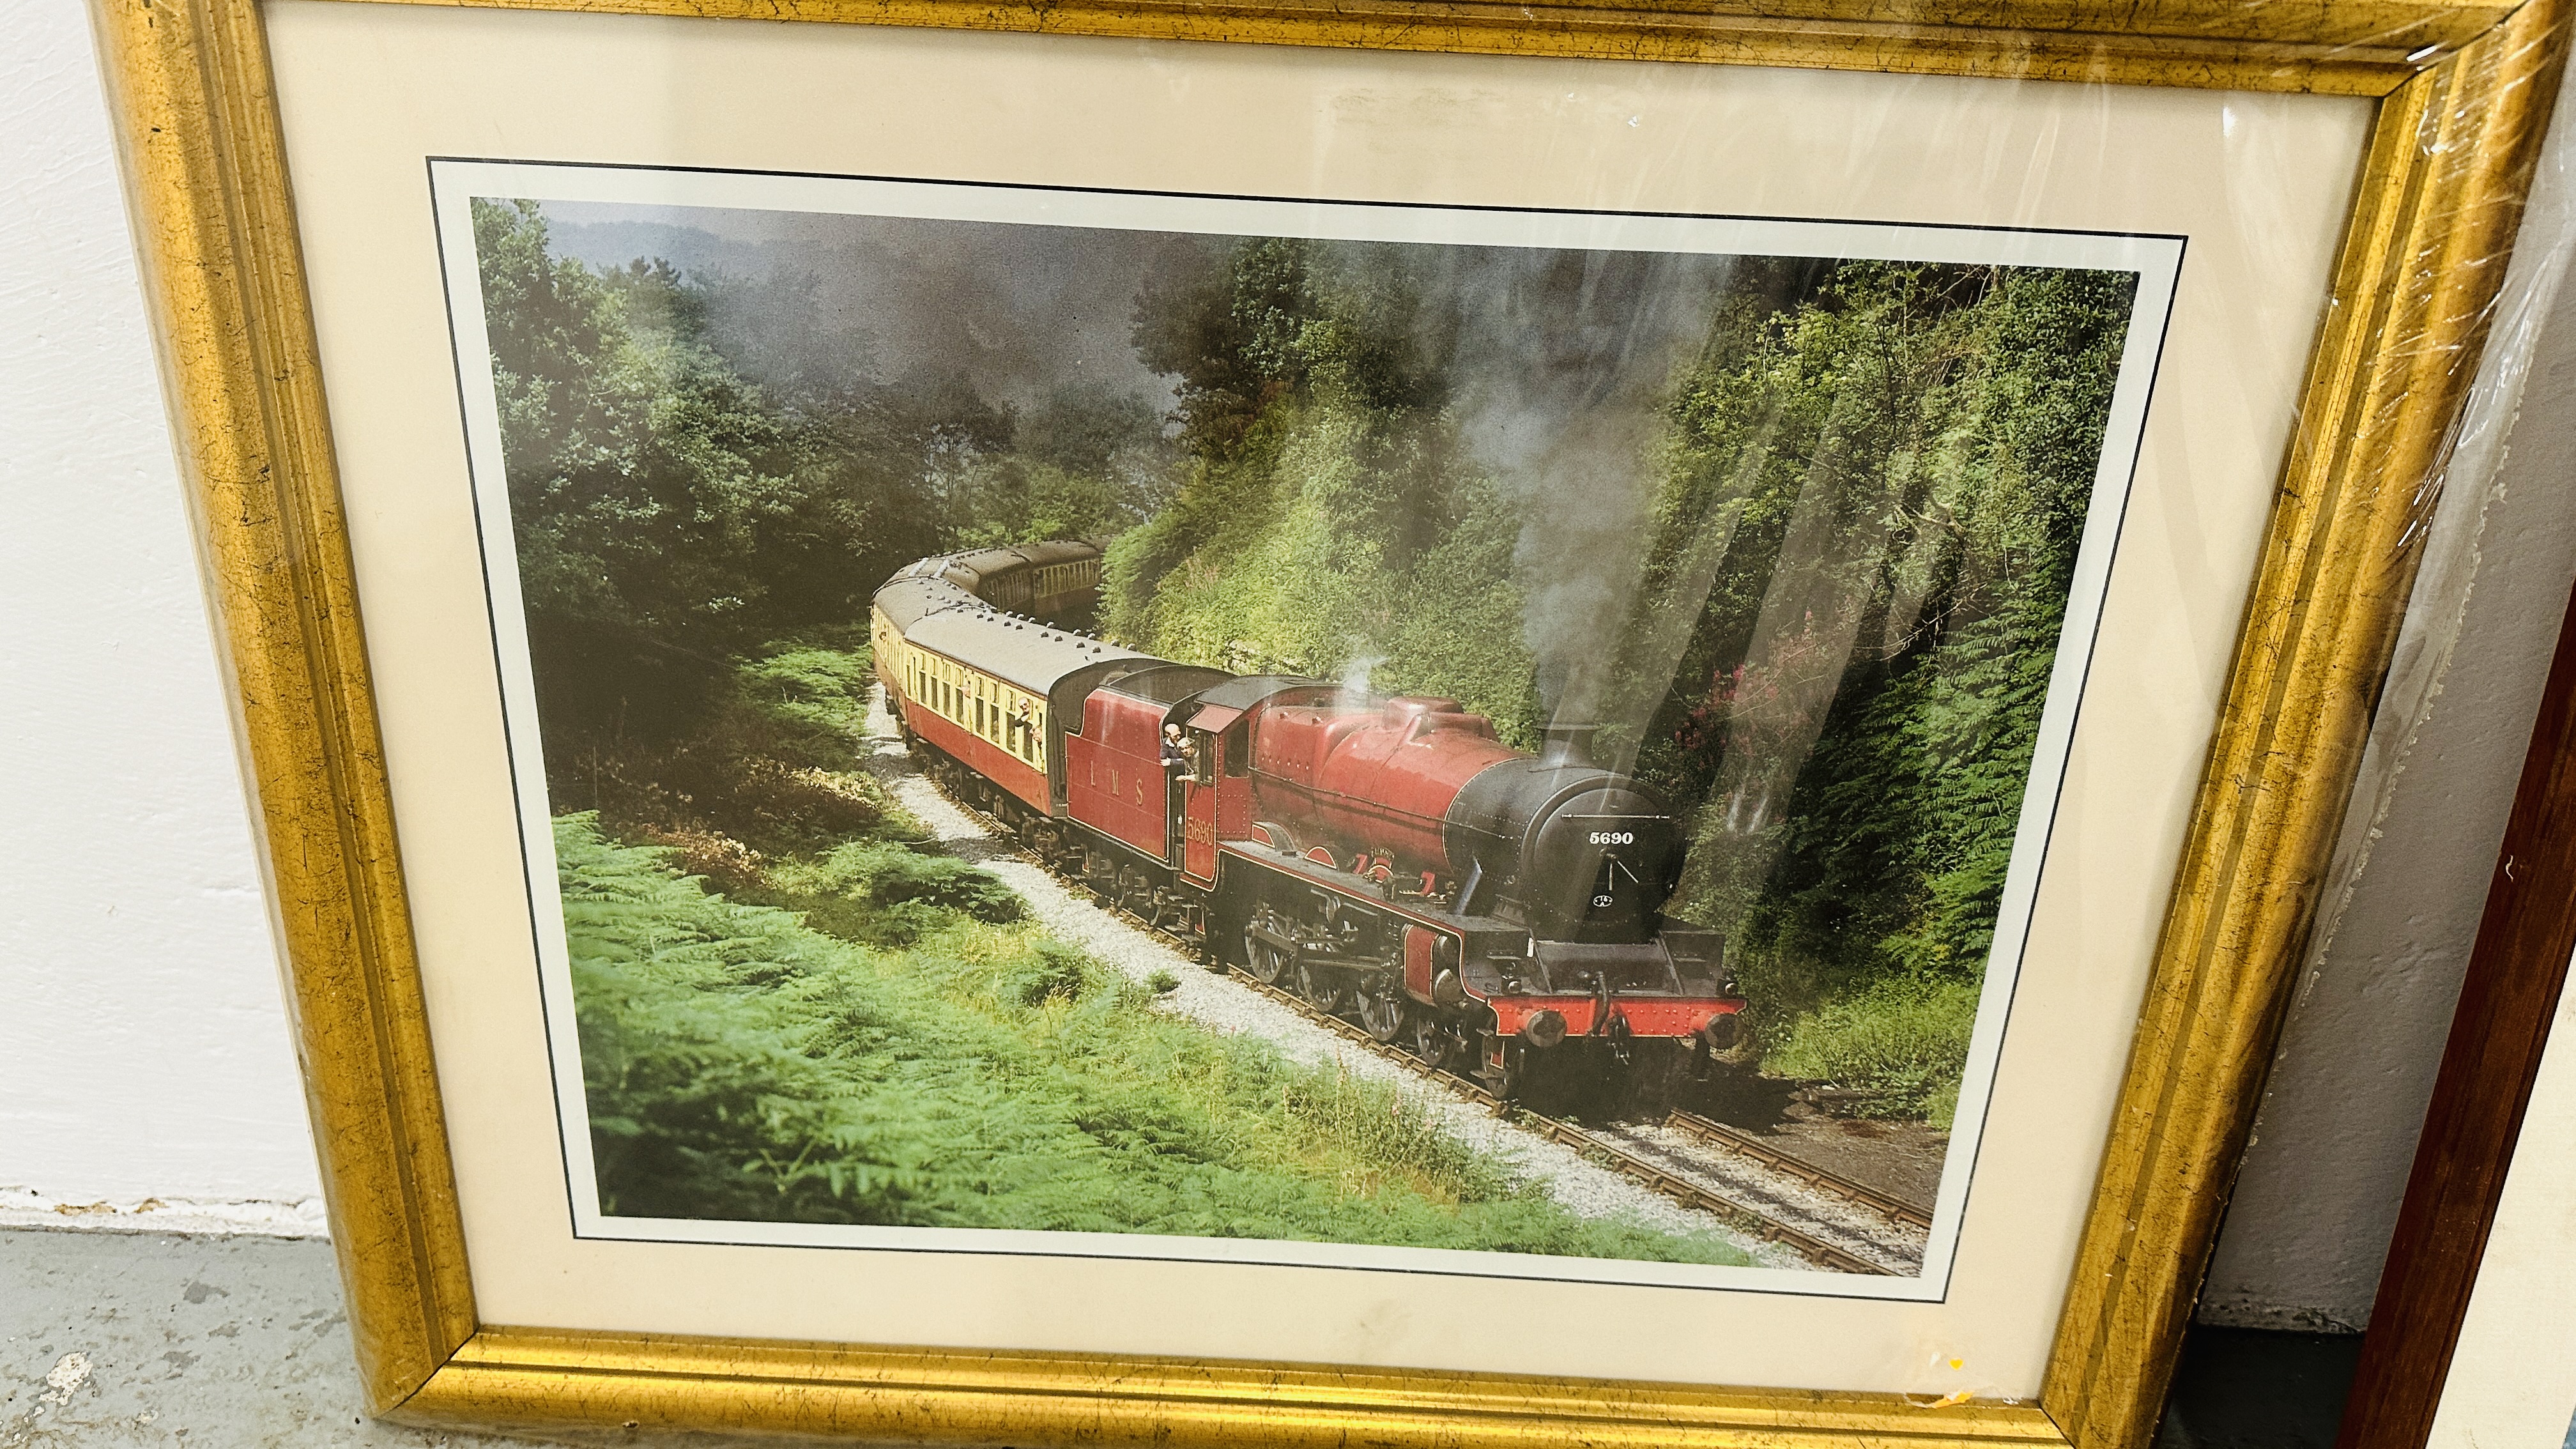 LIMITED EDITION CHRISWOODS STEAM TRAIN PRINT 90/500 "THE TRAVELLERS" 42. - Image 5 of 5